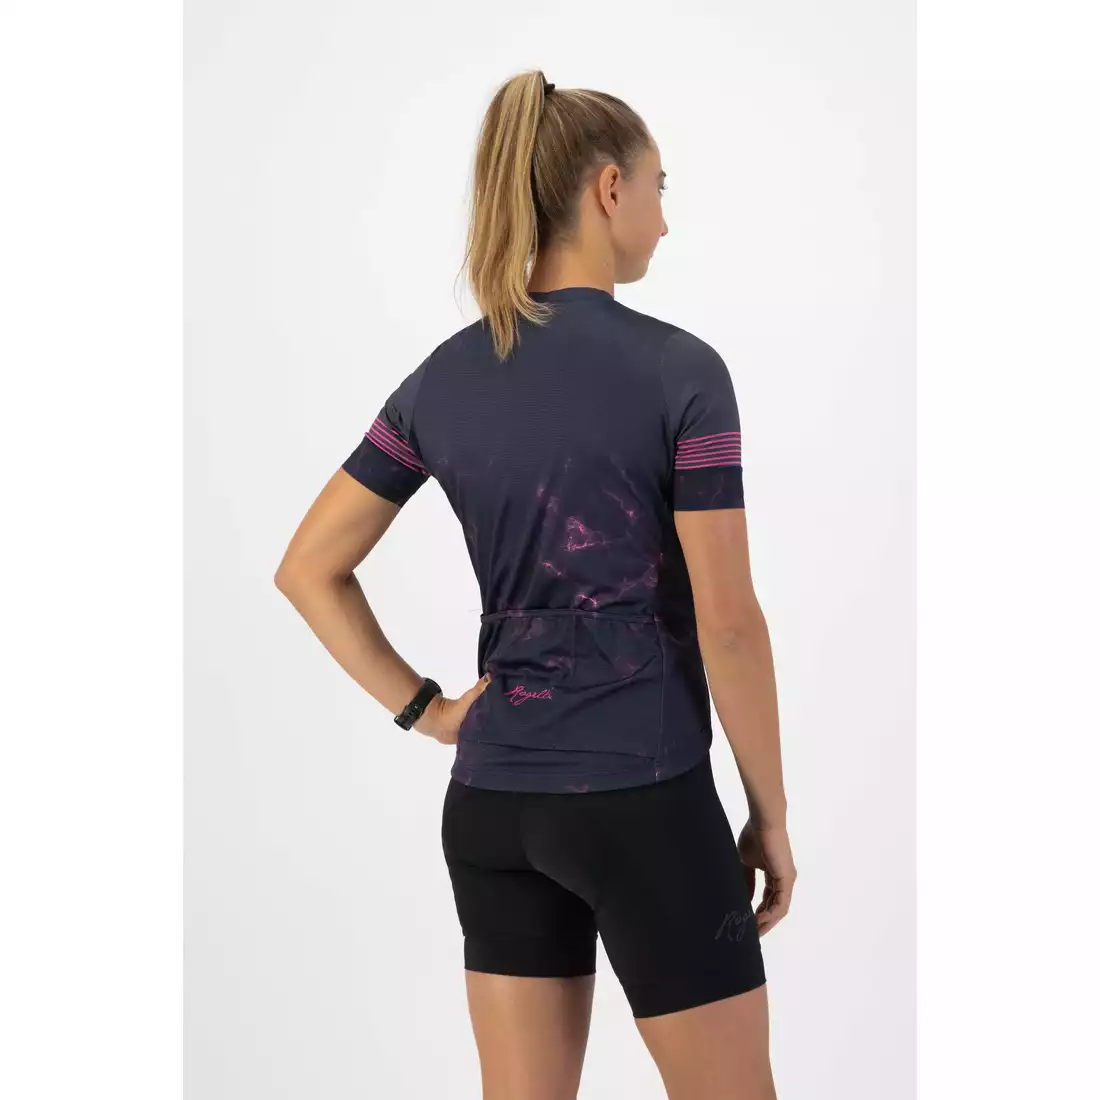 ROGELLI MARBLE Women's cycling jersey, navy blue and pink